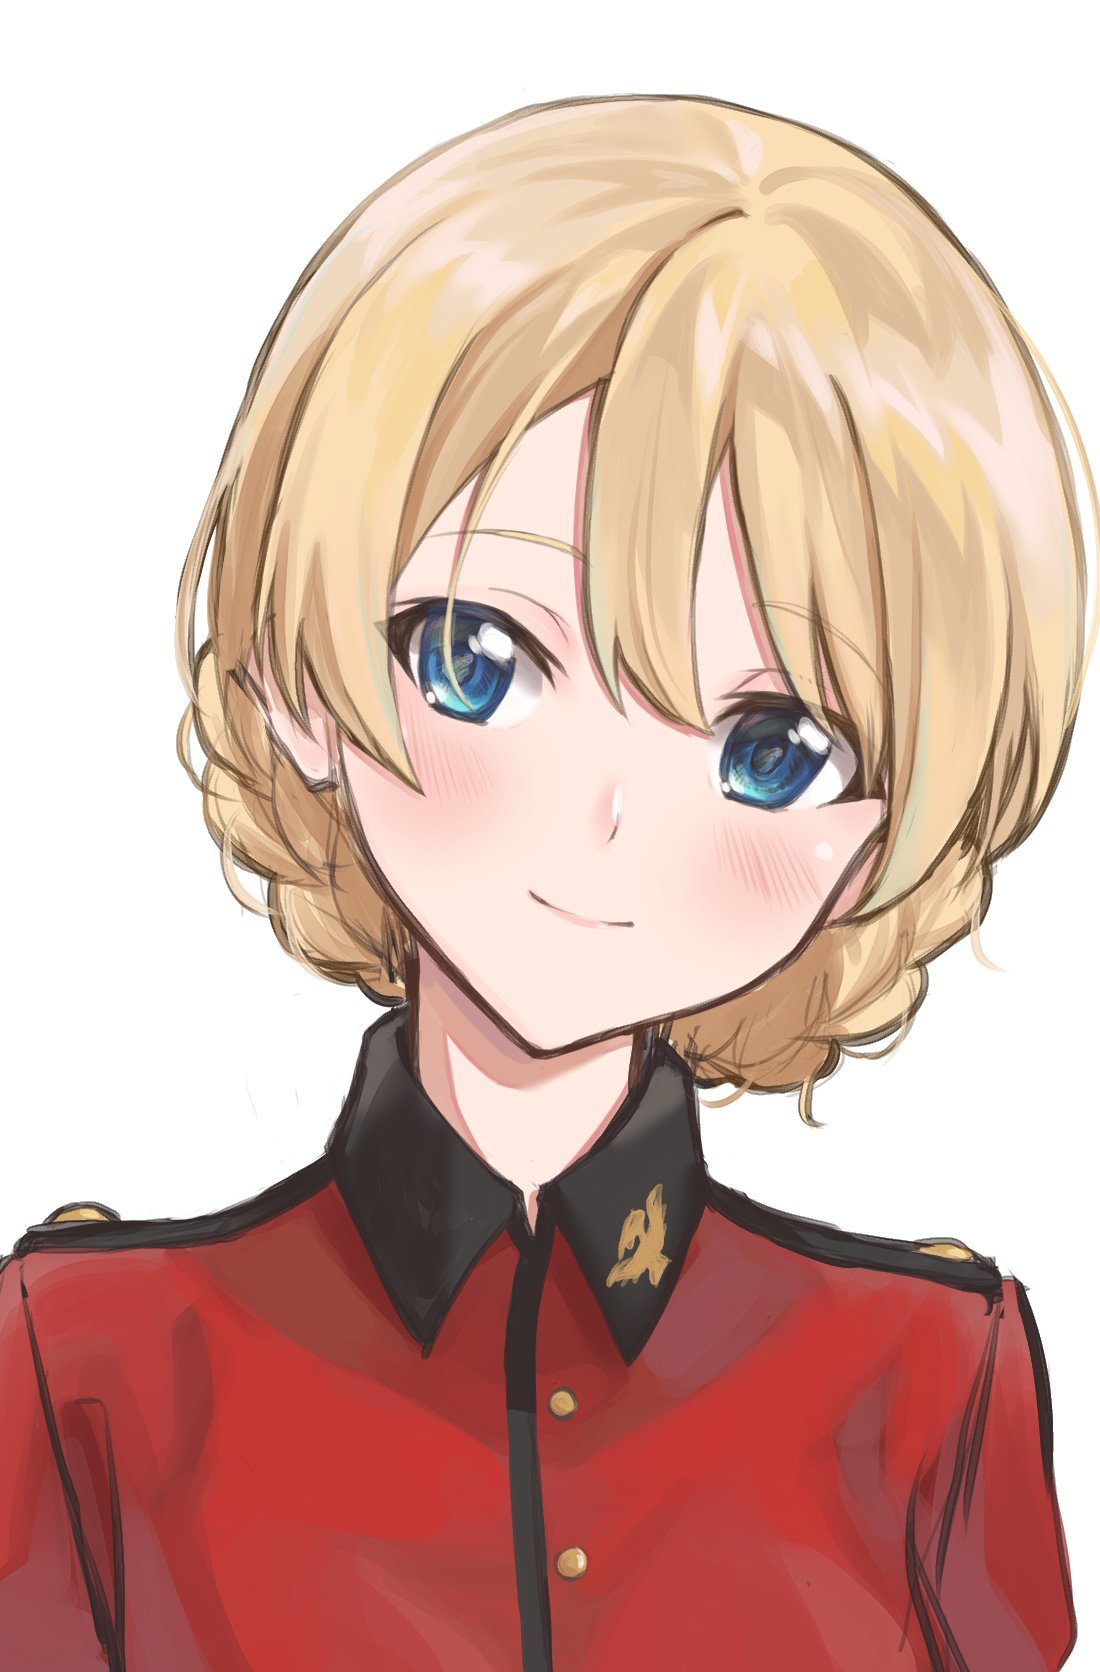 1girl bangs blonde_hair blue_eyes blush braid closed_mouth commentary_request darjeeling epaulettes eyebrows_visible_through_hair face girls_und_panzer head_tilt highres jacket looking_at_viewer mamu_t7s military military_uniform portrait red_jacket short_hair simple_background smile solo st._gloriana's_military_uniform tied_hair twin_braids uniform white_background